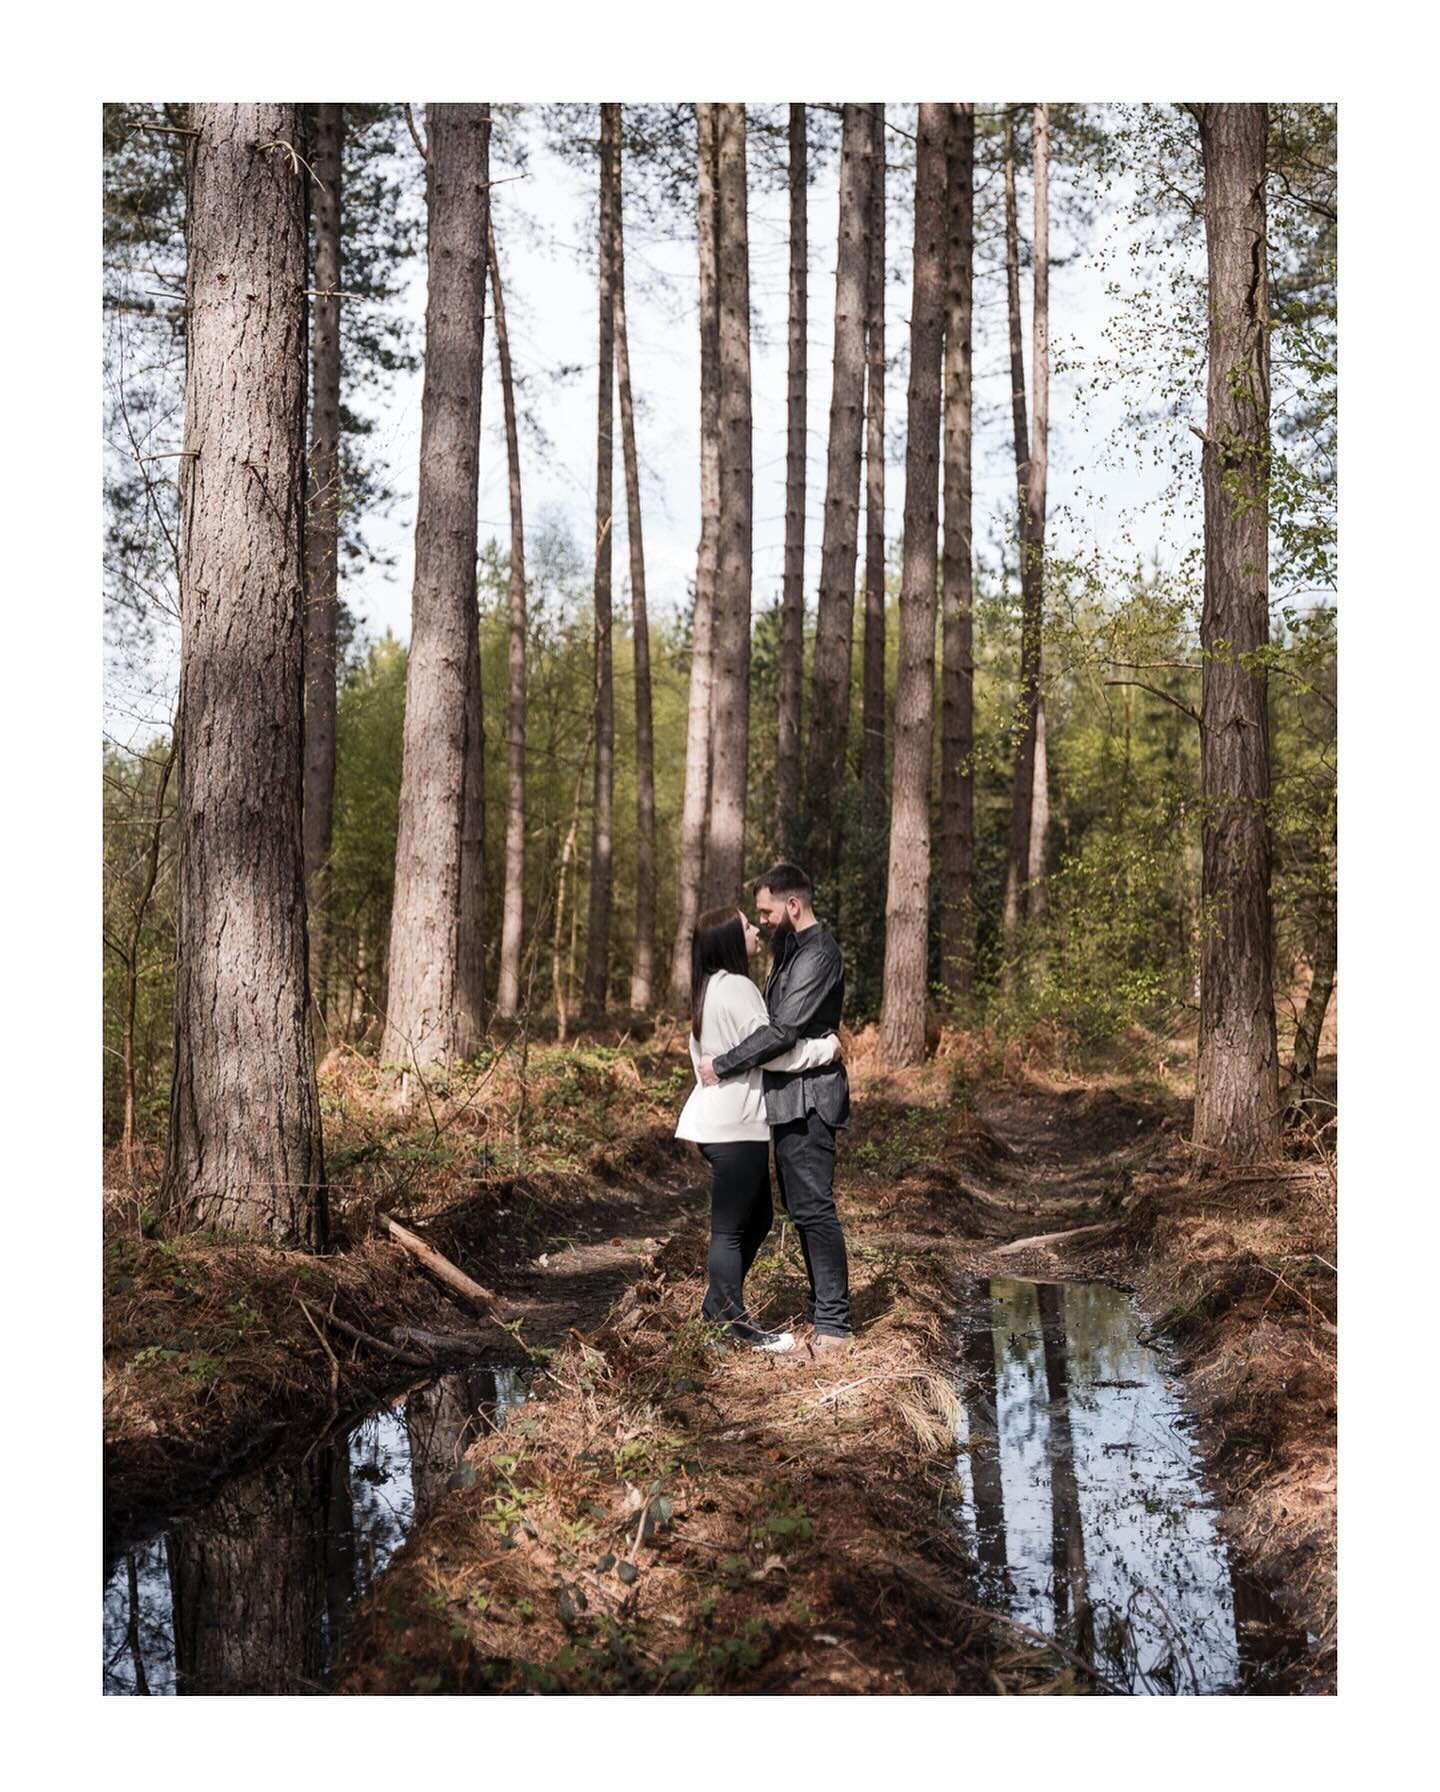 A few weeks back we shared the morning with Faye and Matt at Sherwood Pines 🌲 for a pre wedding shoot! Couldn&rsquo;t have asked for better weather or company! We had a fantastic walk and definitely didn&rsquo;t get lost at any point!!! 😂 

Here&rs